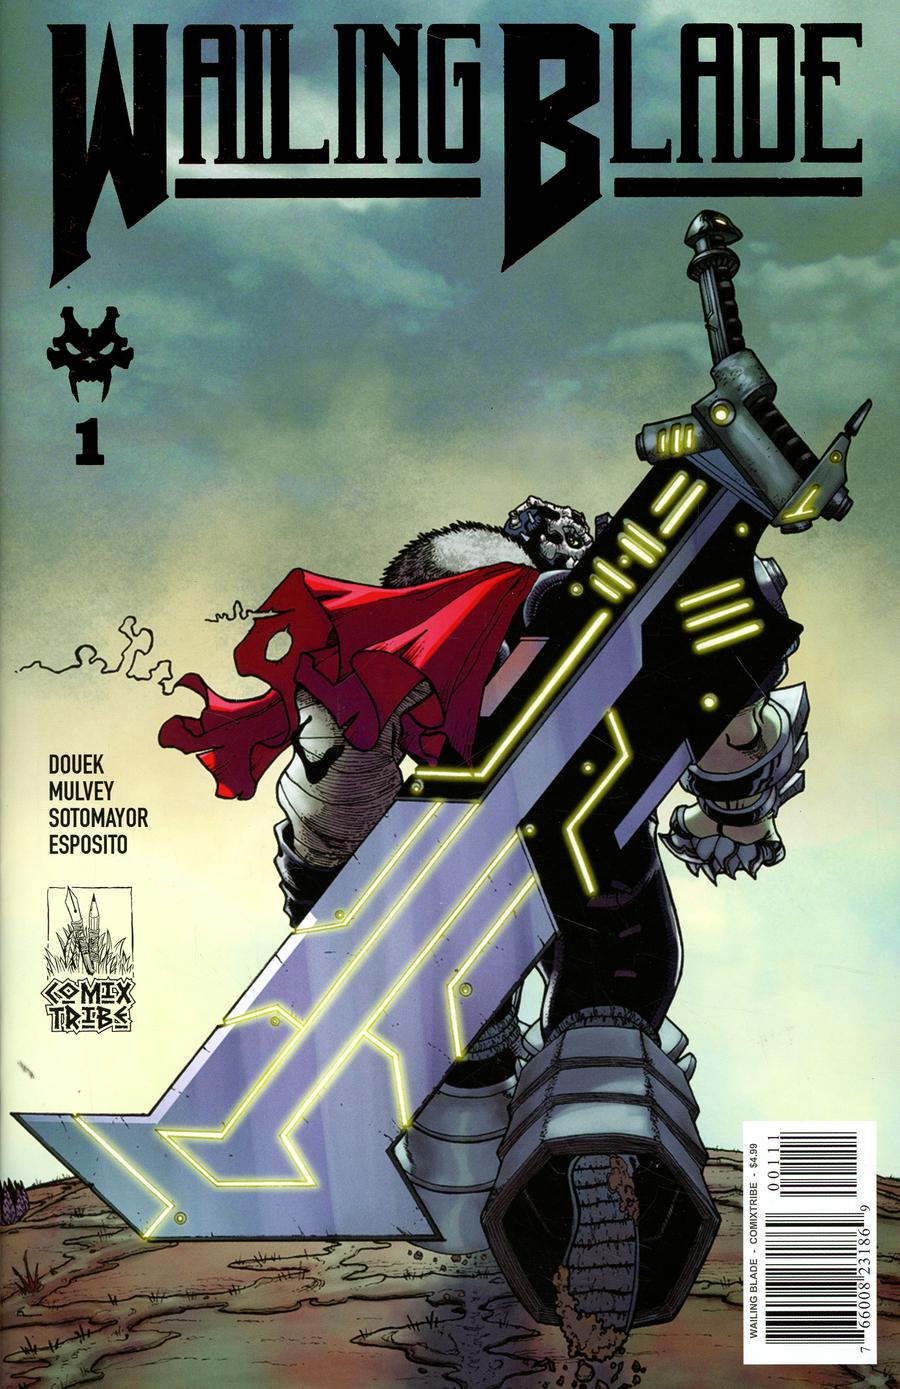 Wailing Blade #1 Cover B Day Gold Foil